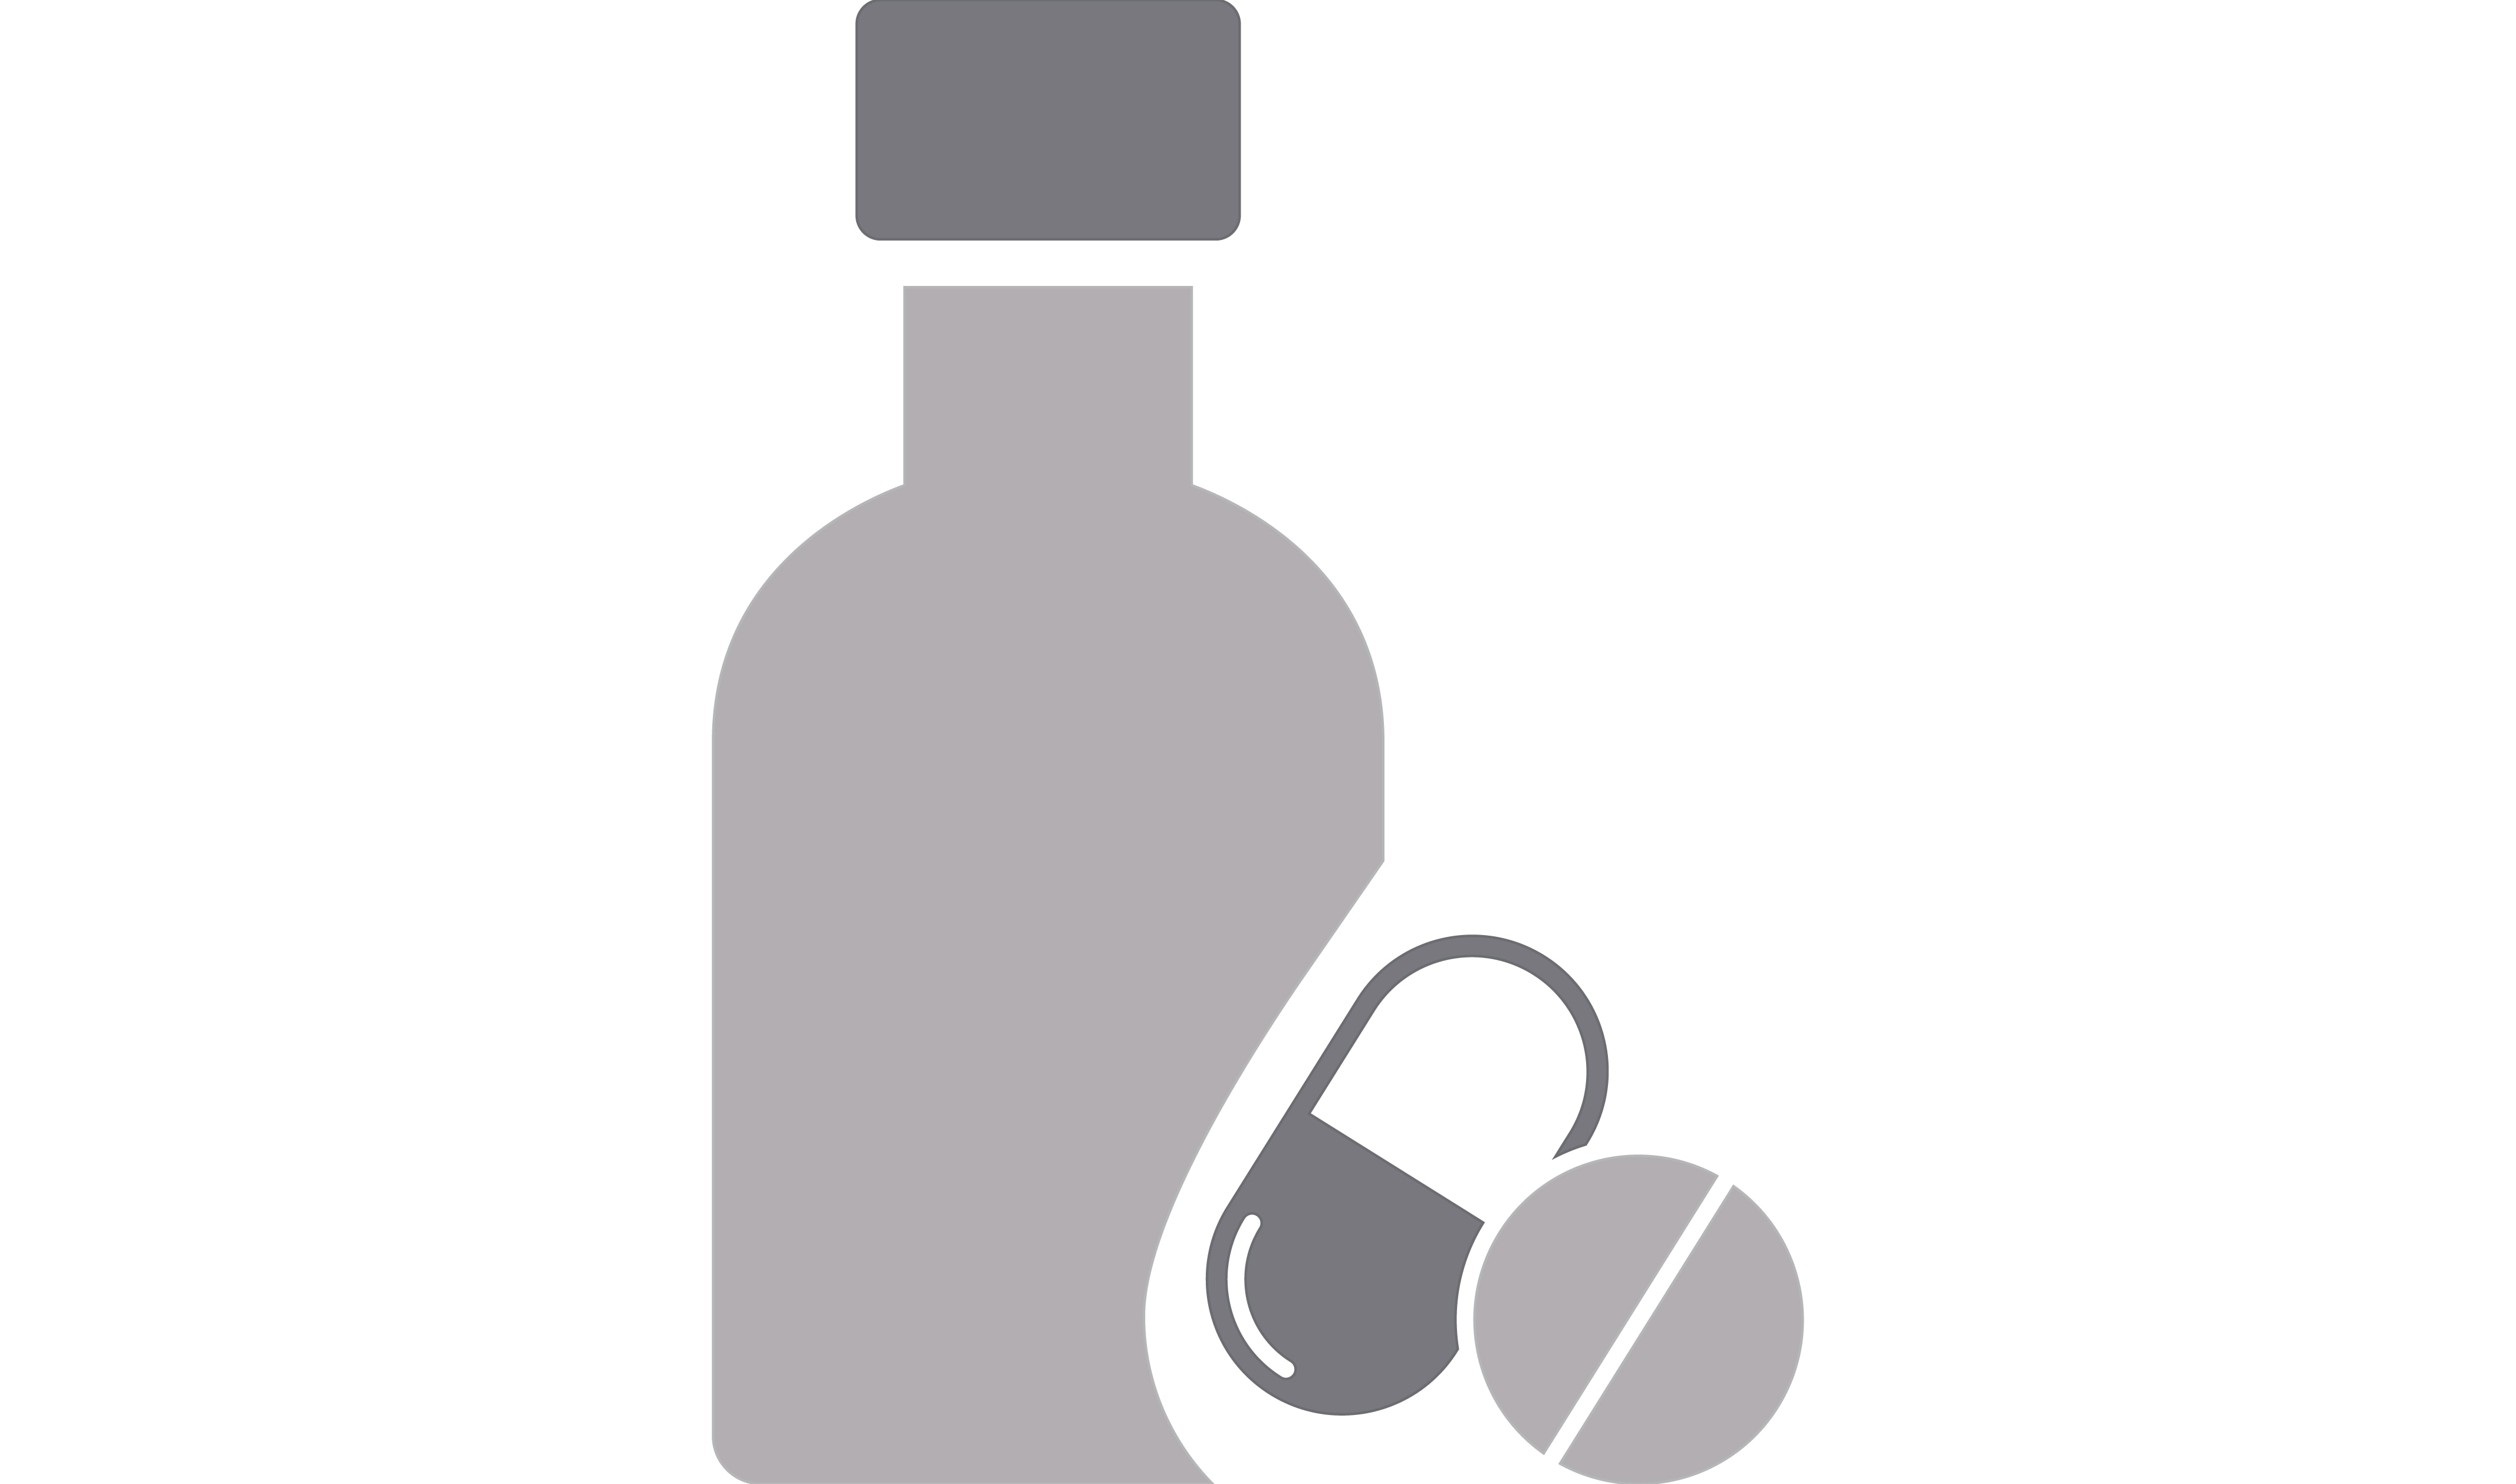 An icon of pills and a bottle